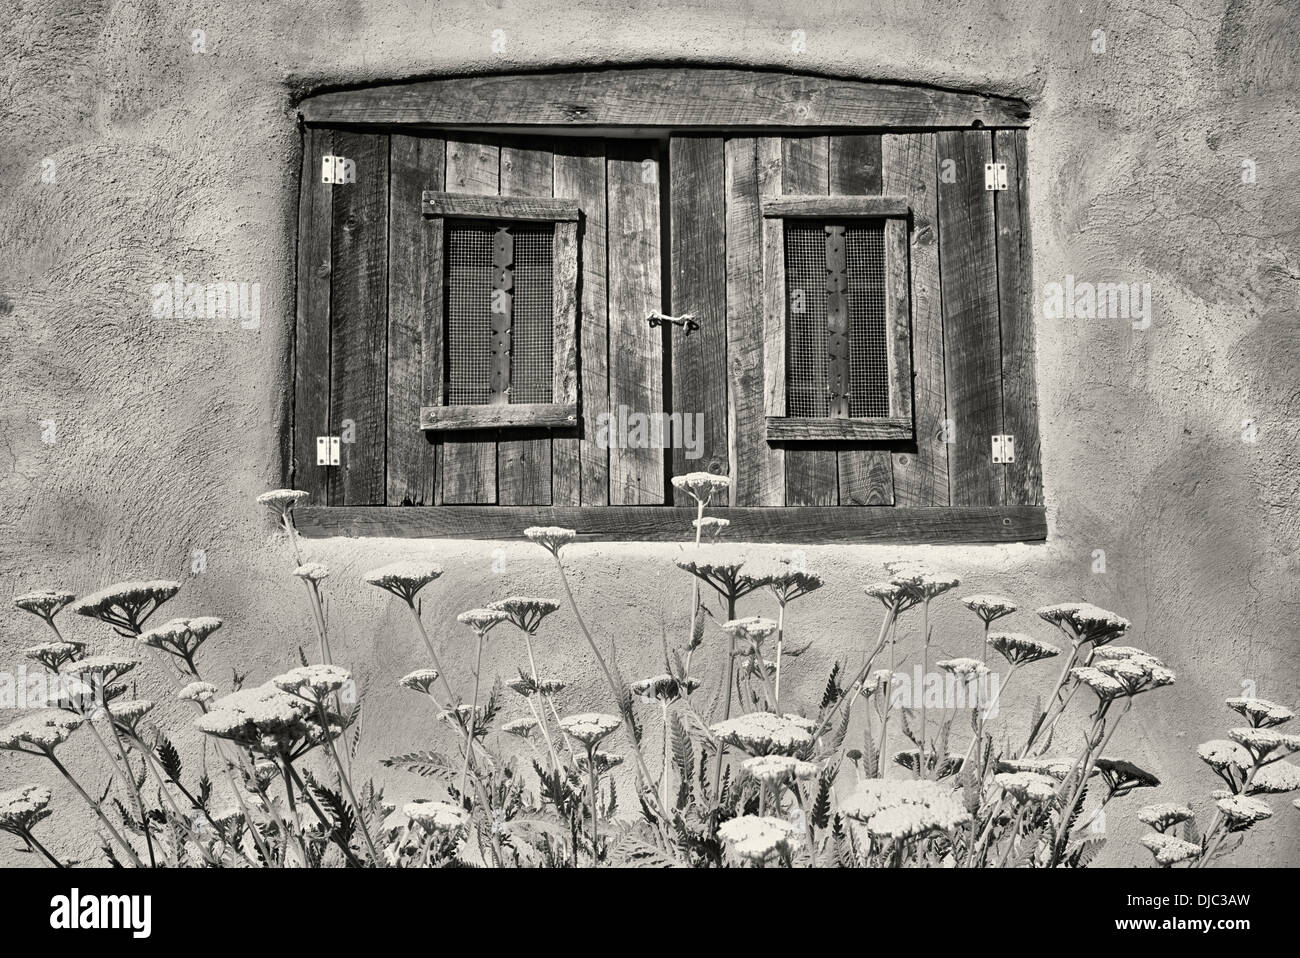 Yarrow flowers in garden with historic window in adobe house. Taos, New Mexico. Stock Photo